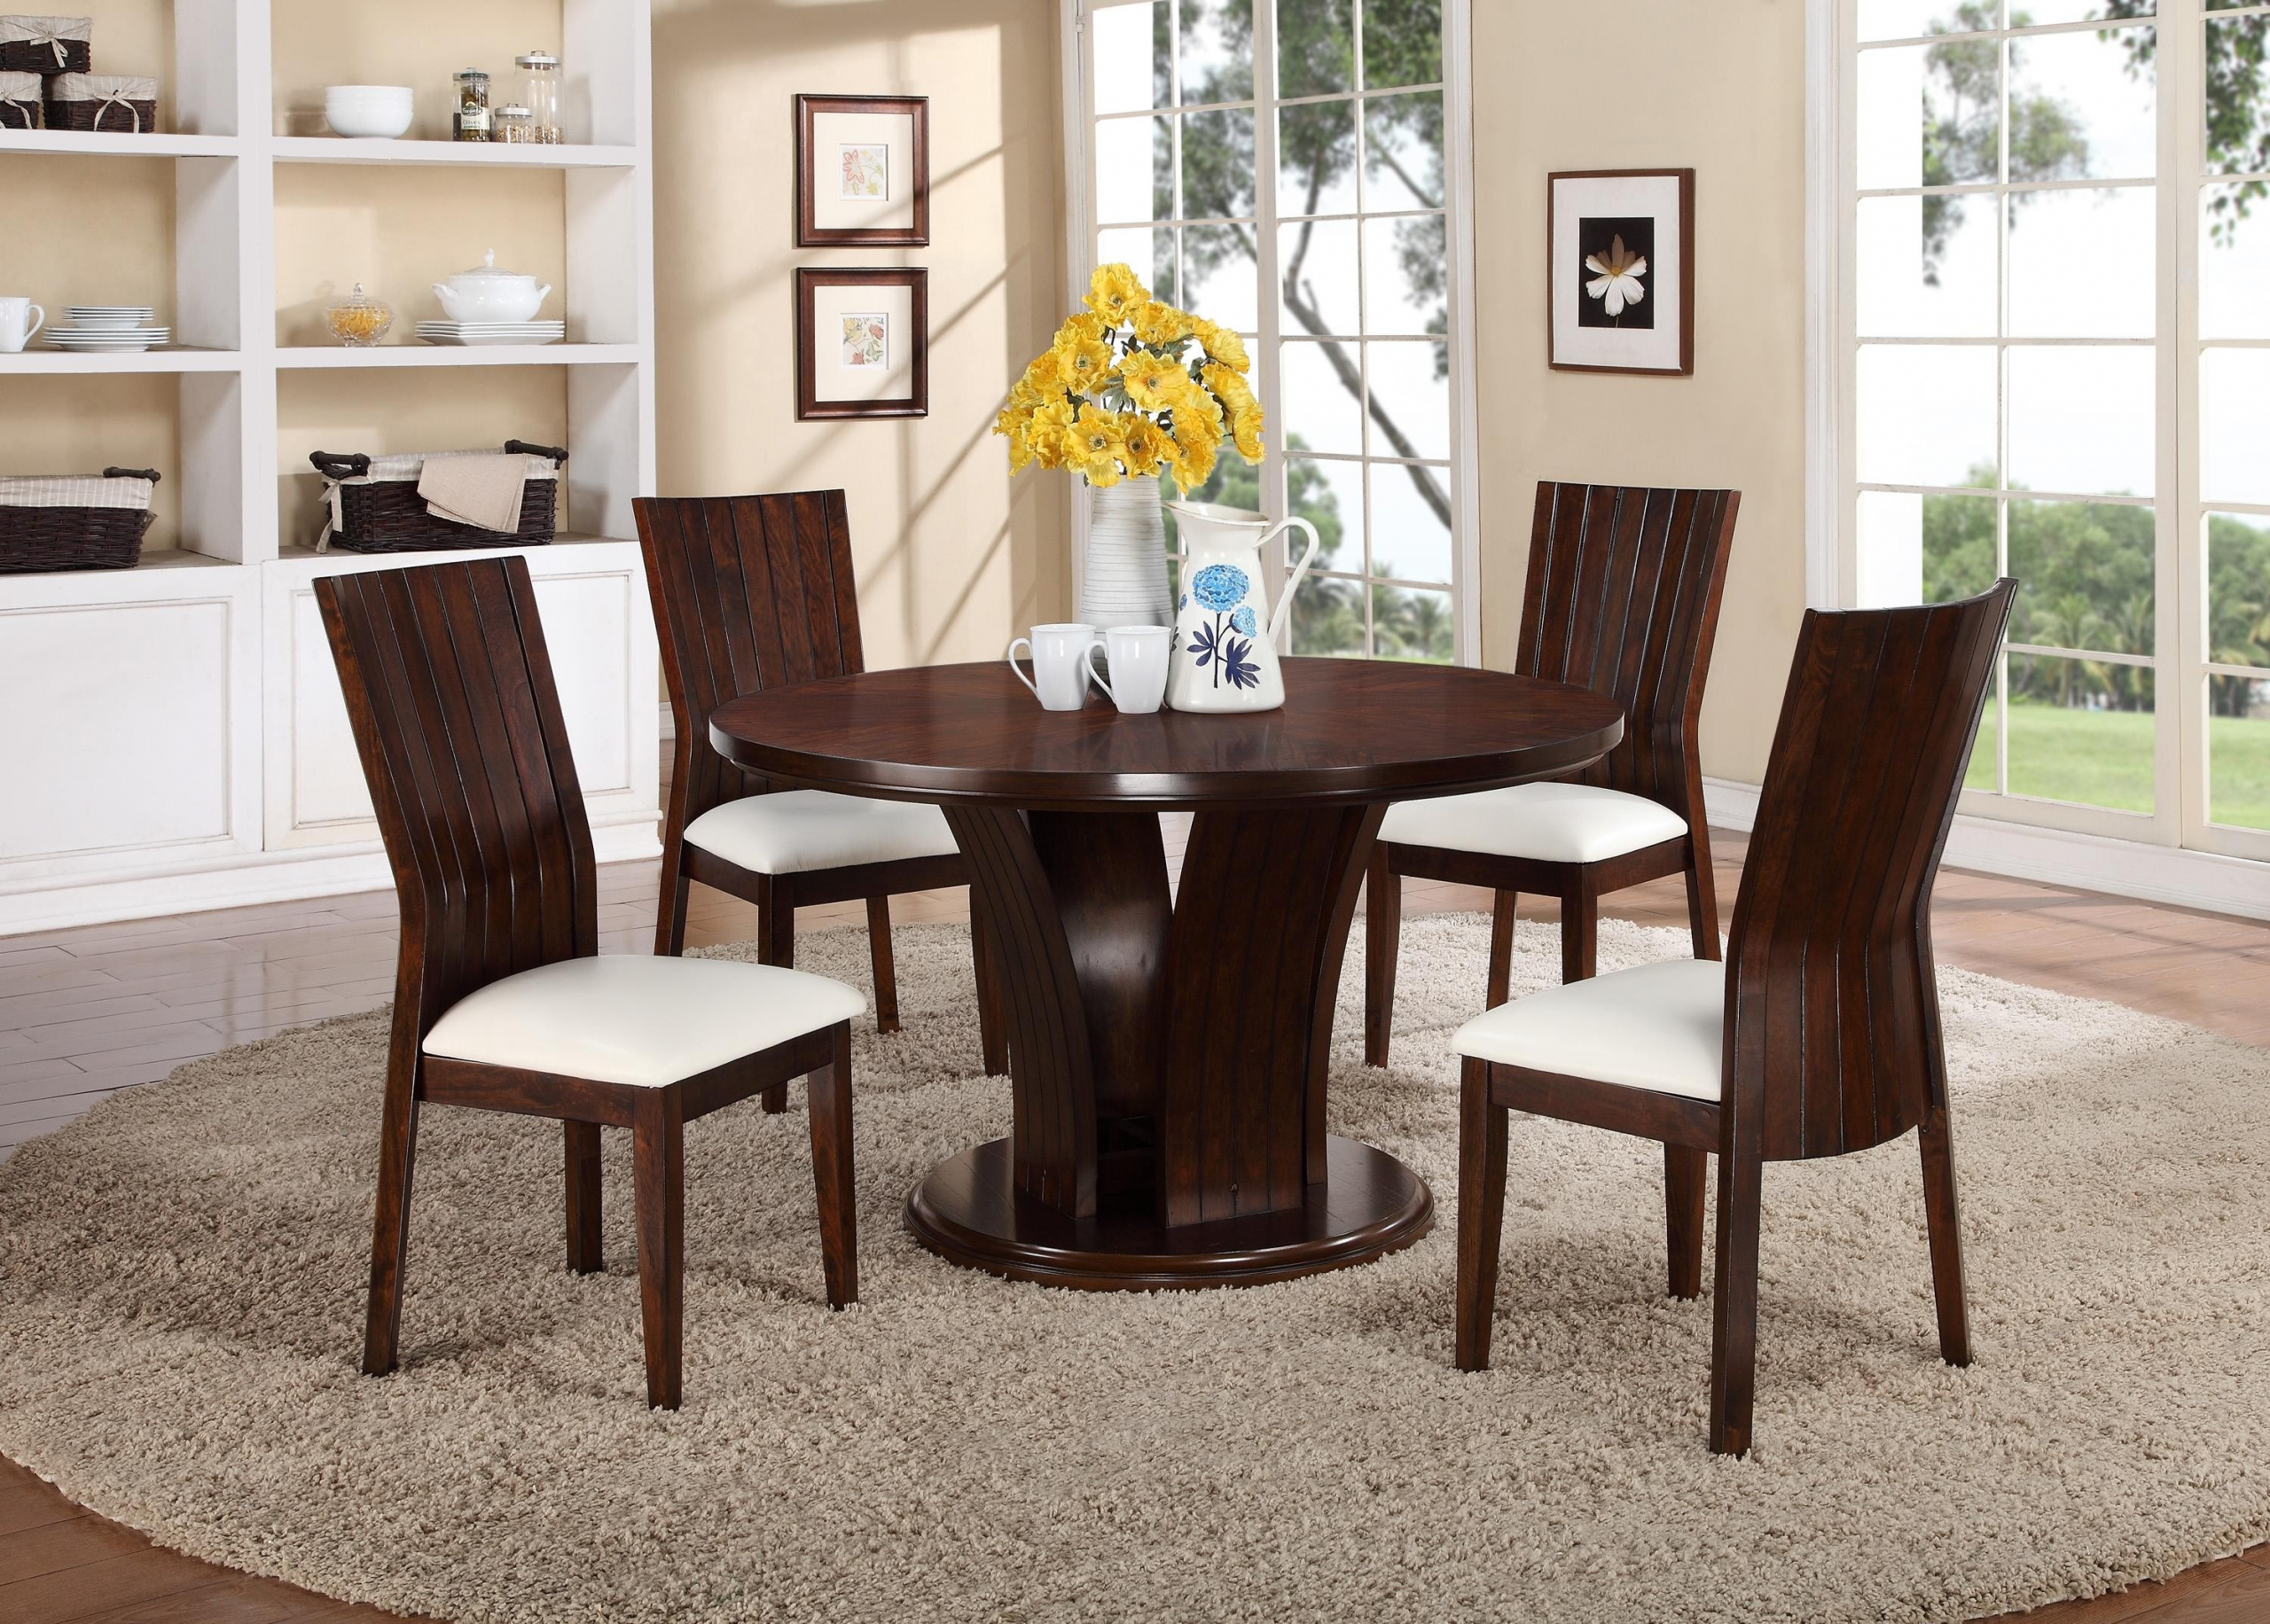 Round Dining Table Kijiji Ottawa Archives Masclientesmx New throughout dimensions 3000 X 2147